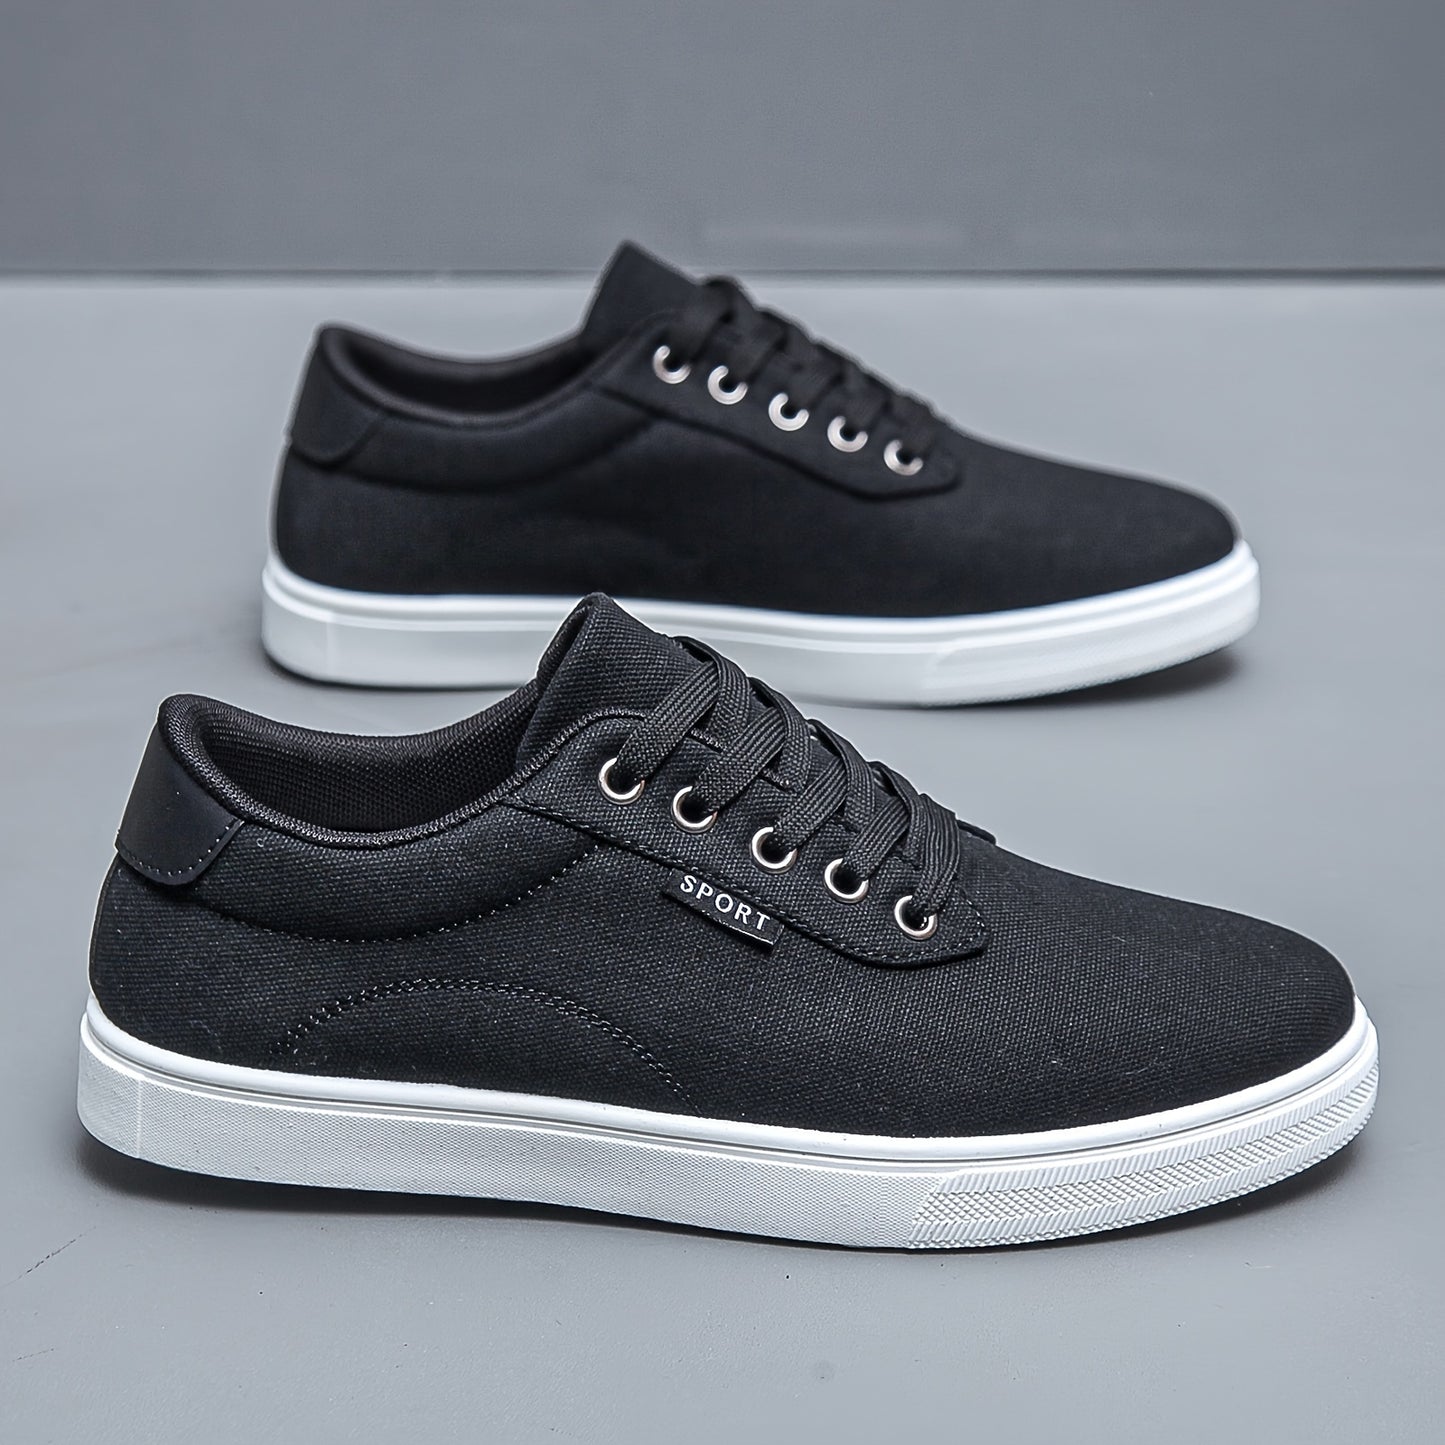 Men's Solid Skate Shoes - Comfy Non-Slip Street Style Sneakers for All Seasons Outdoor Workout Activities